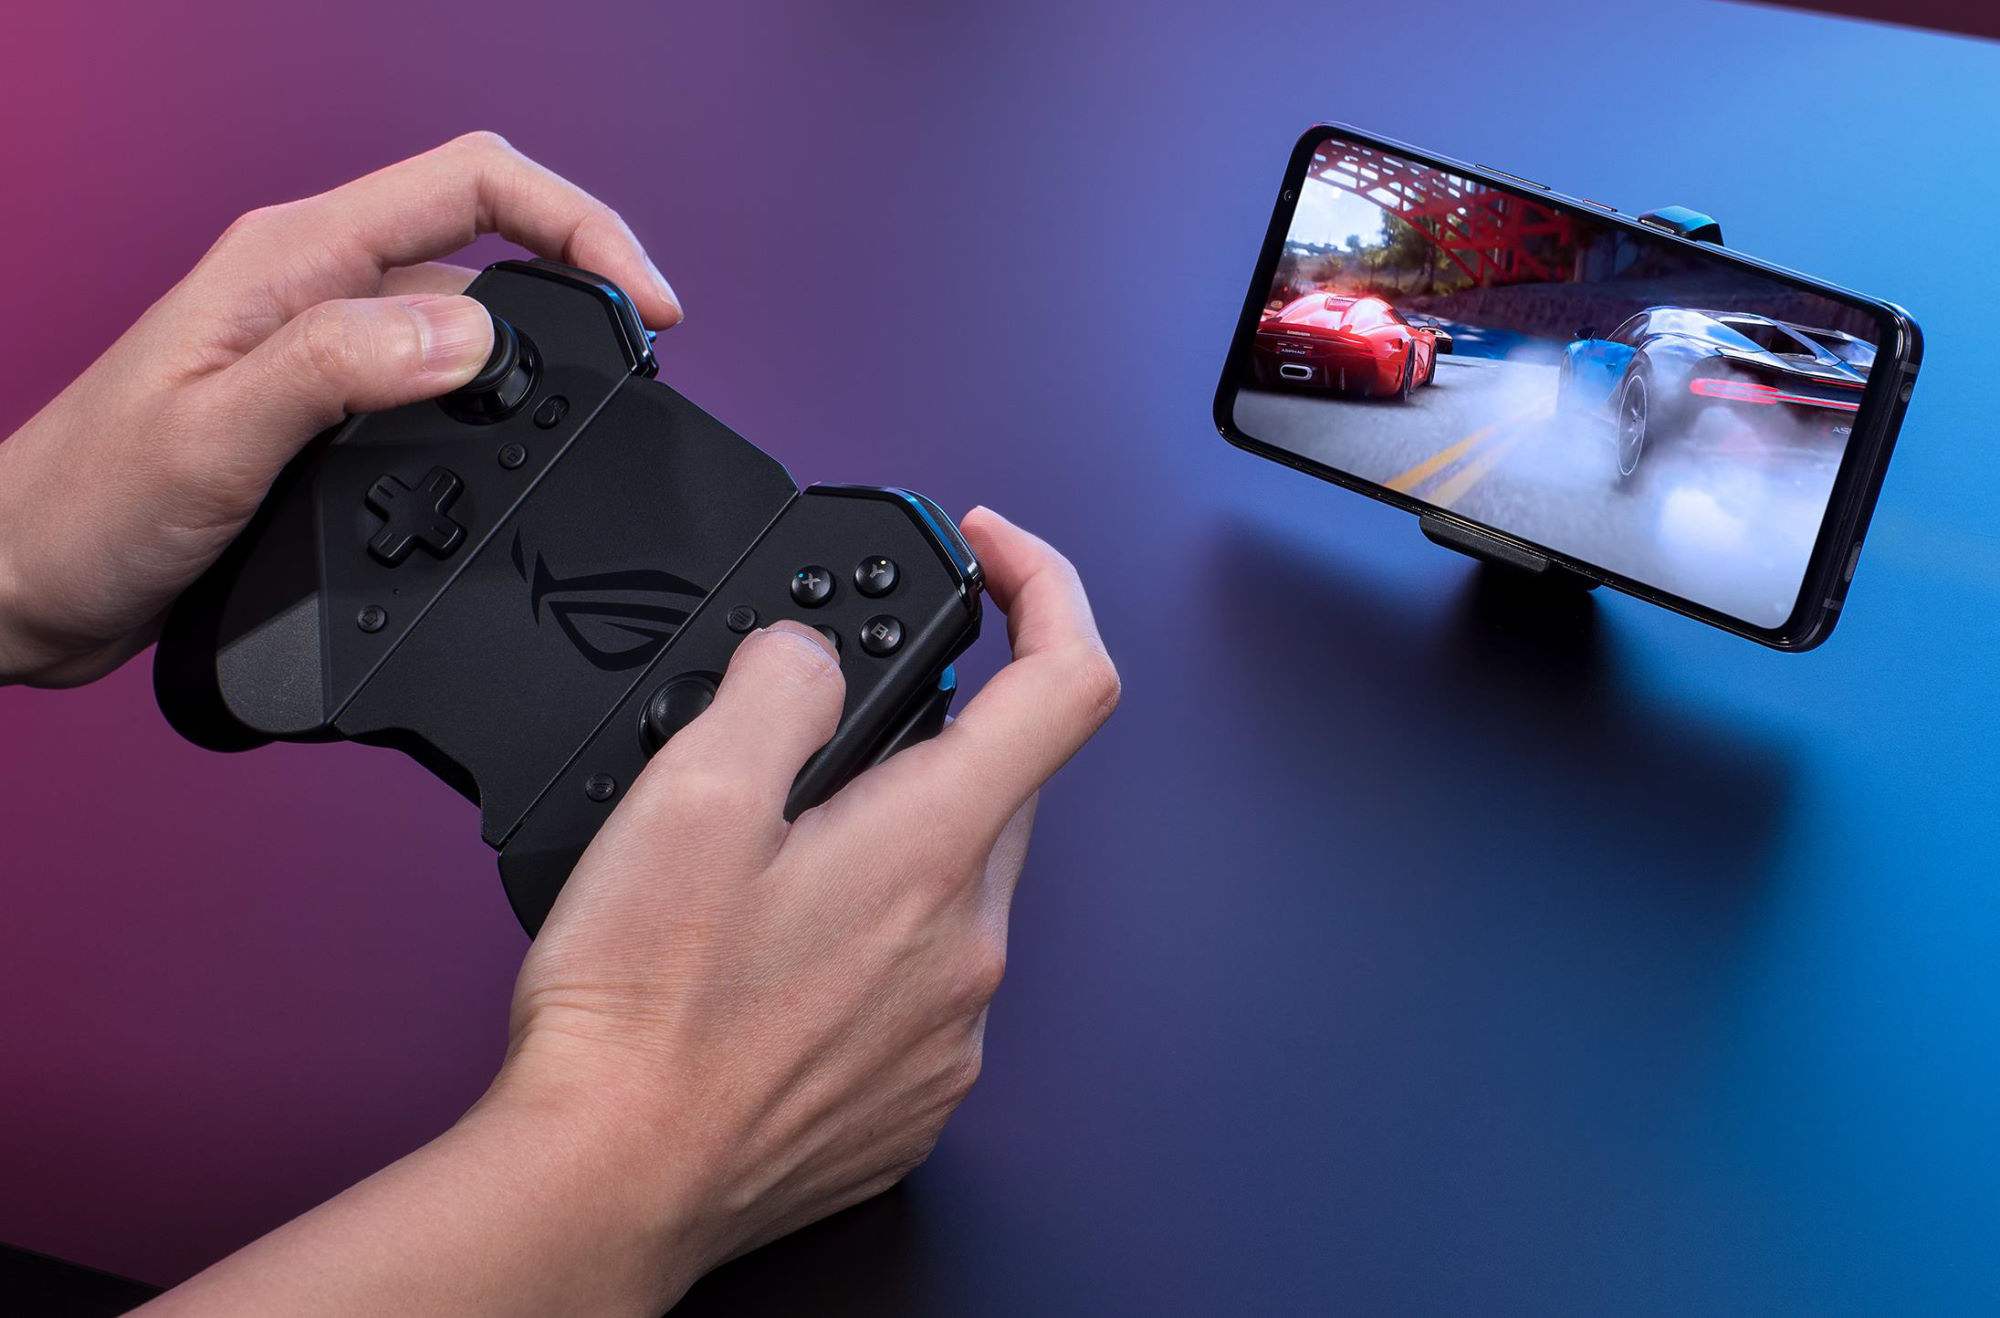 Image of a gamer holding the Kunai 3 gamepad to compete in a racing game, with the phone sitting on a table.